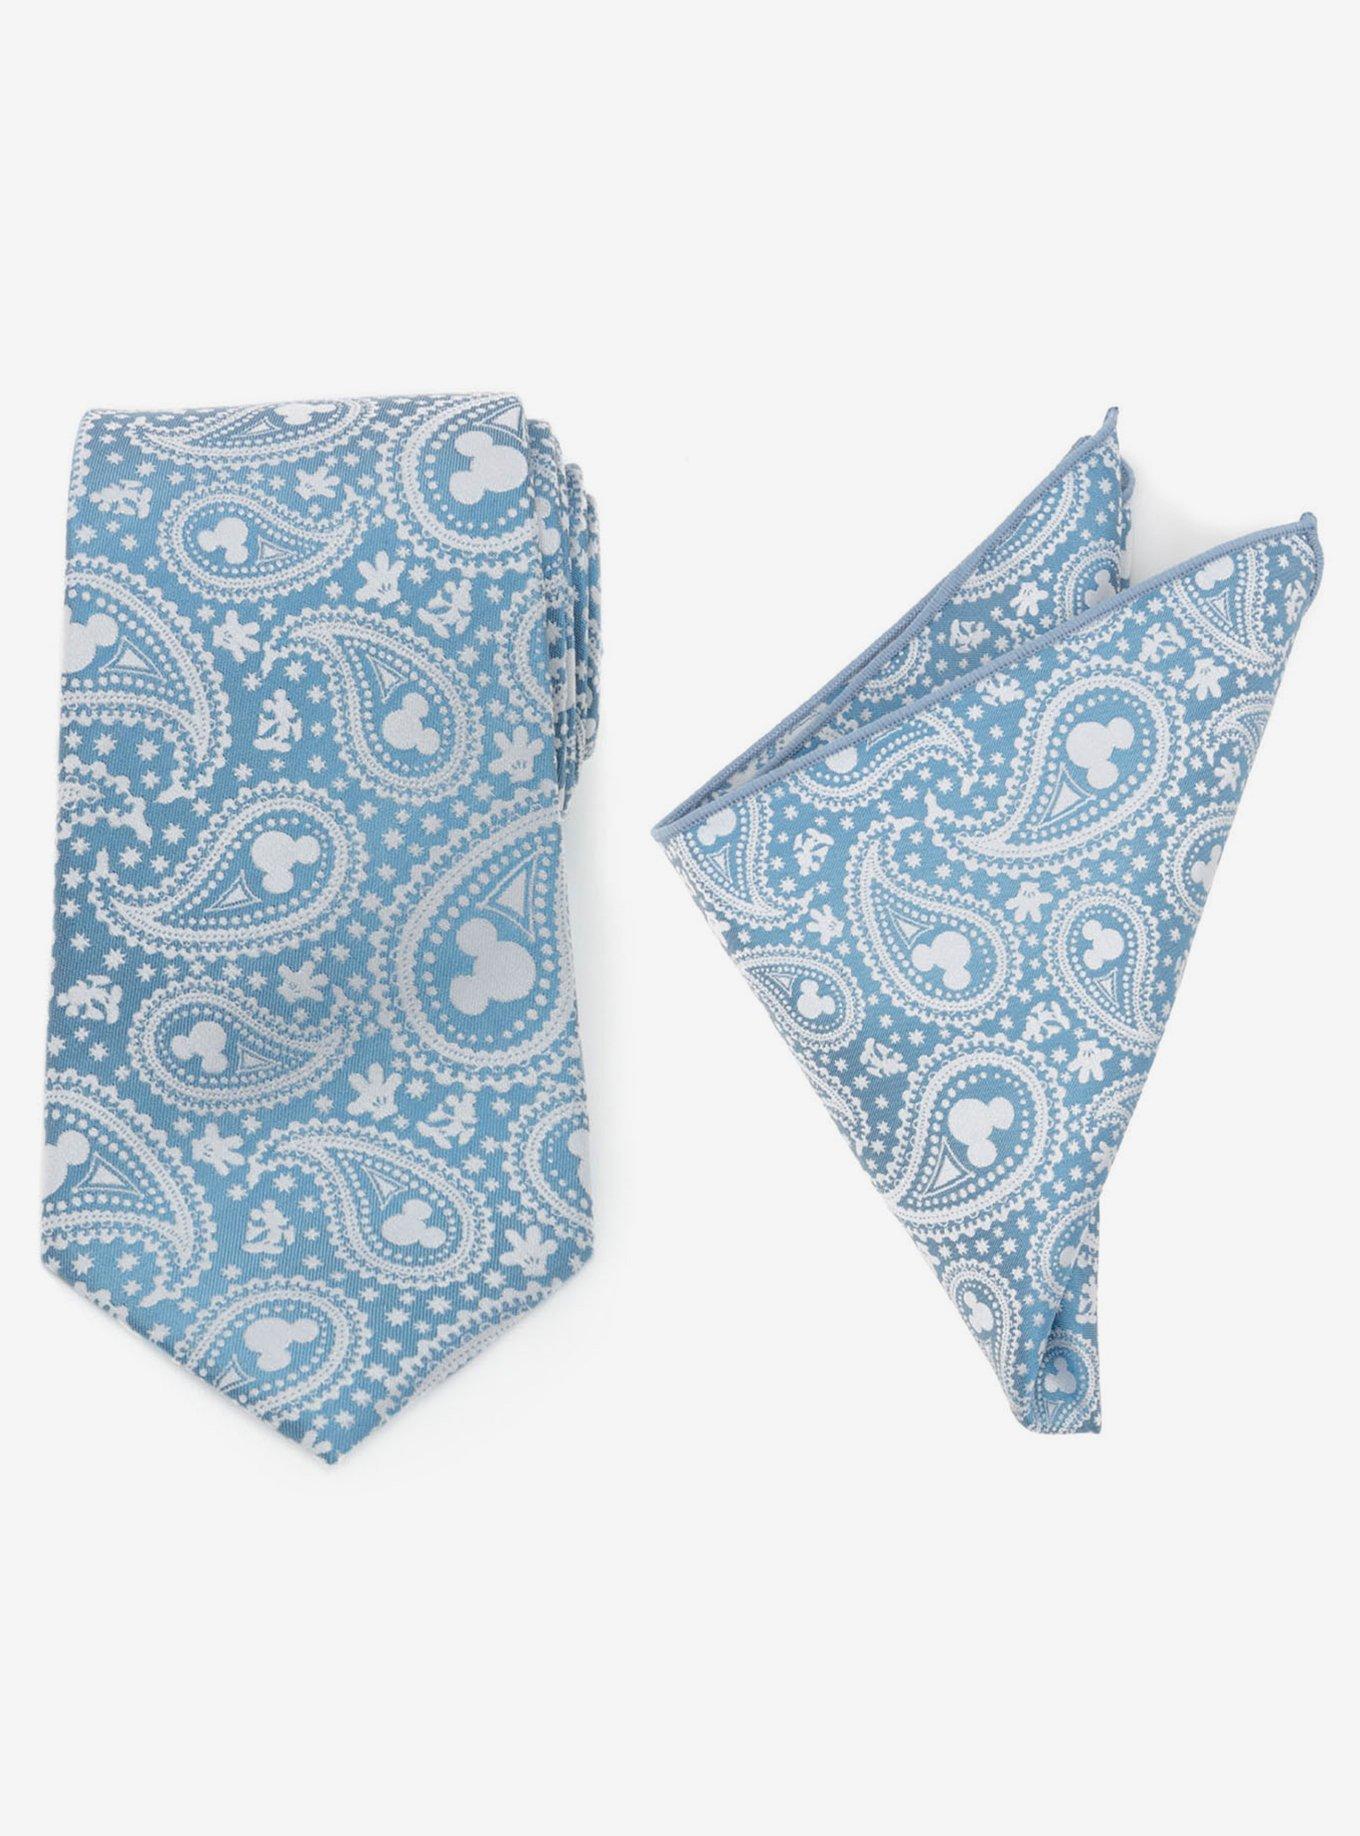 Disney Mickey Mouse Teal Paisley Necktie and Pocket Square Set | Hot Topic